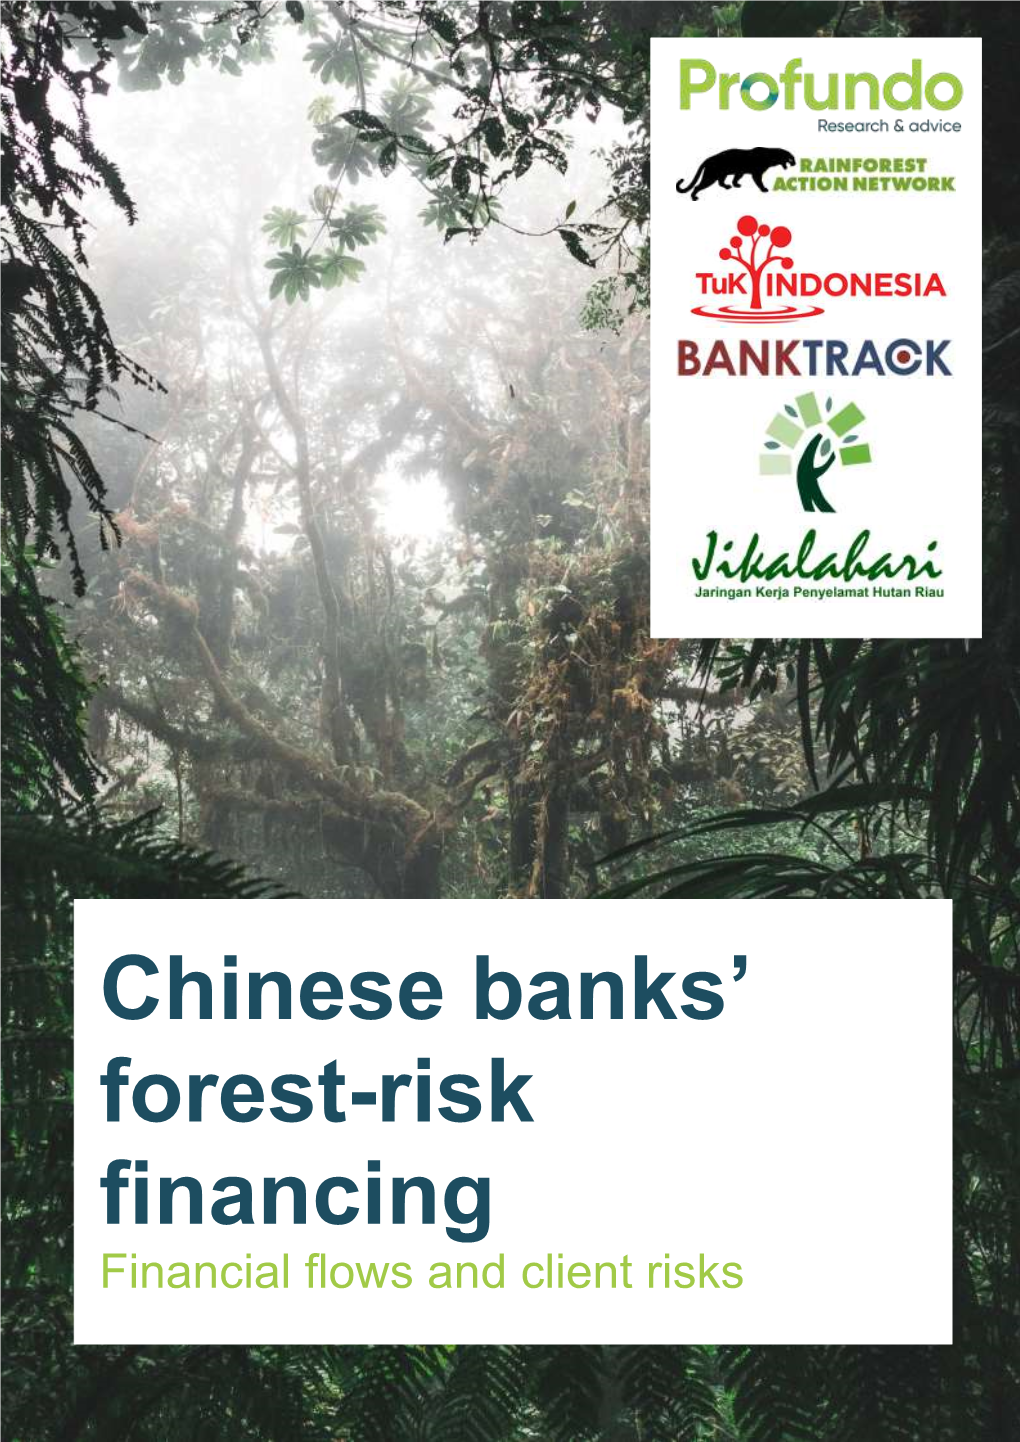 May 10 2021 Chinese Banks' Forest-Risk Financing